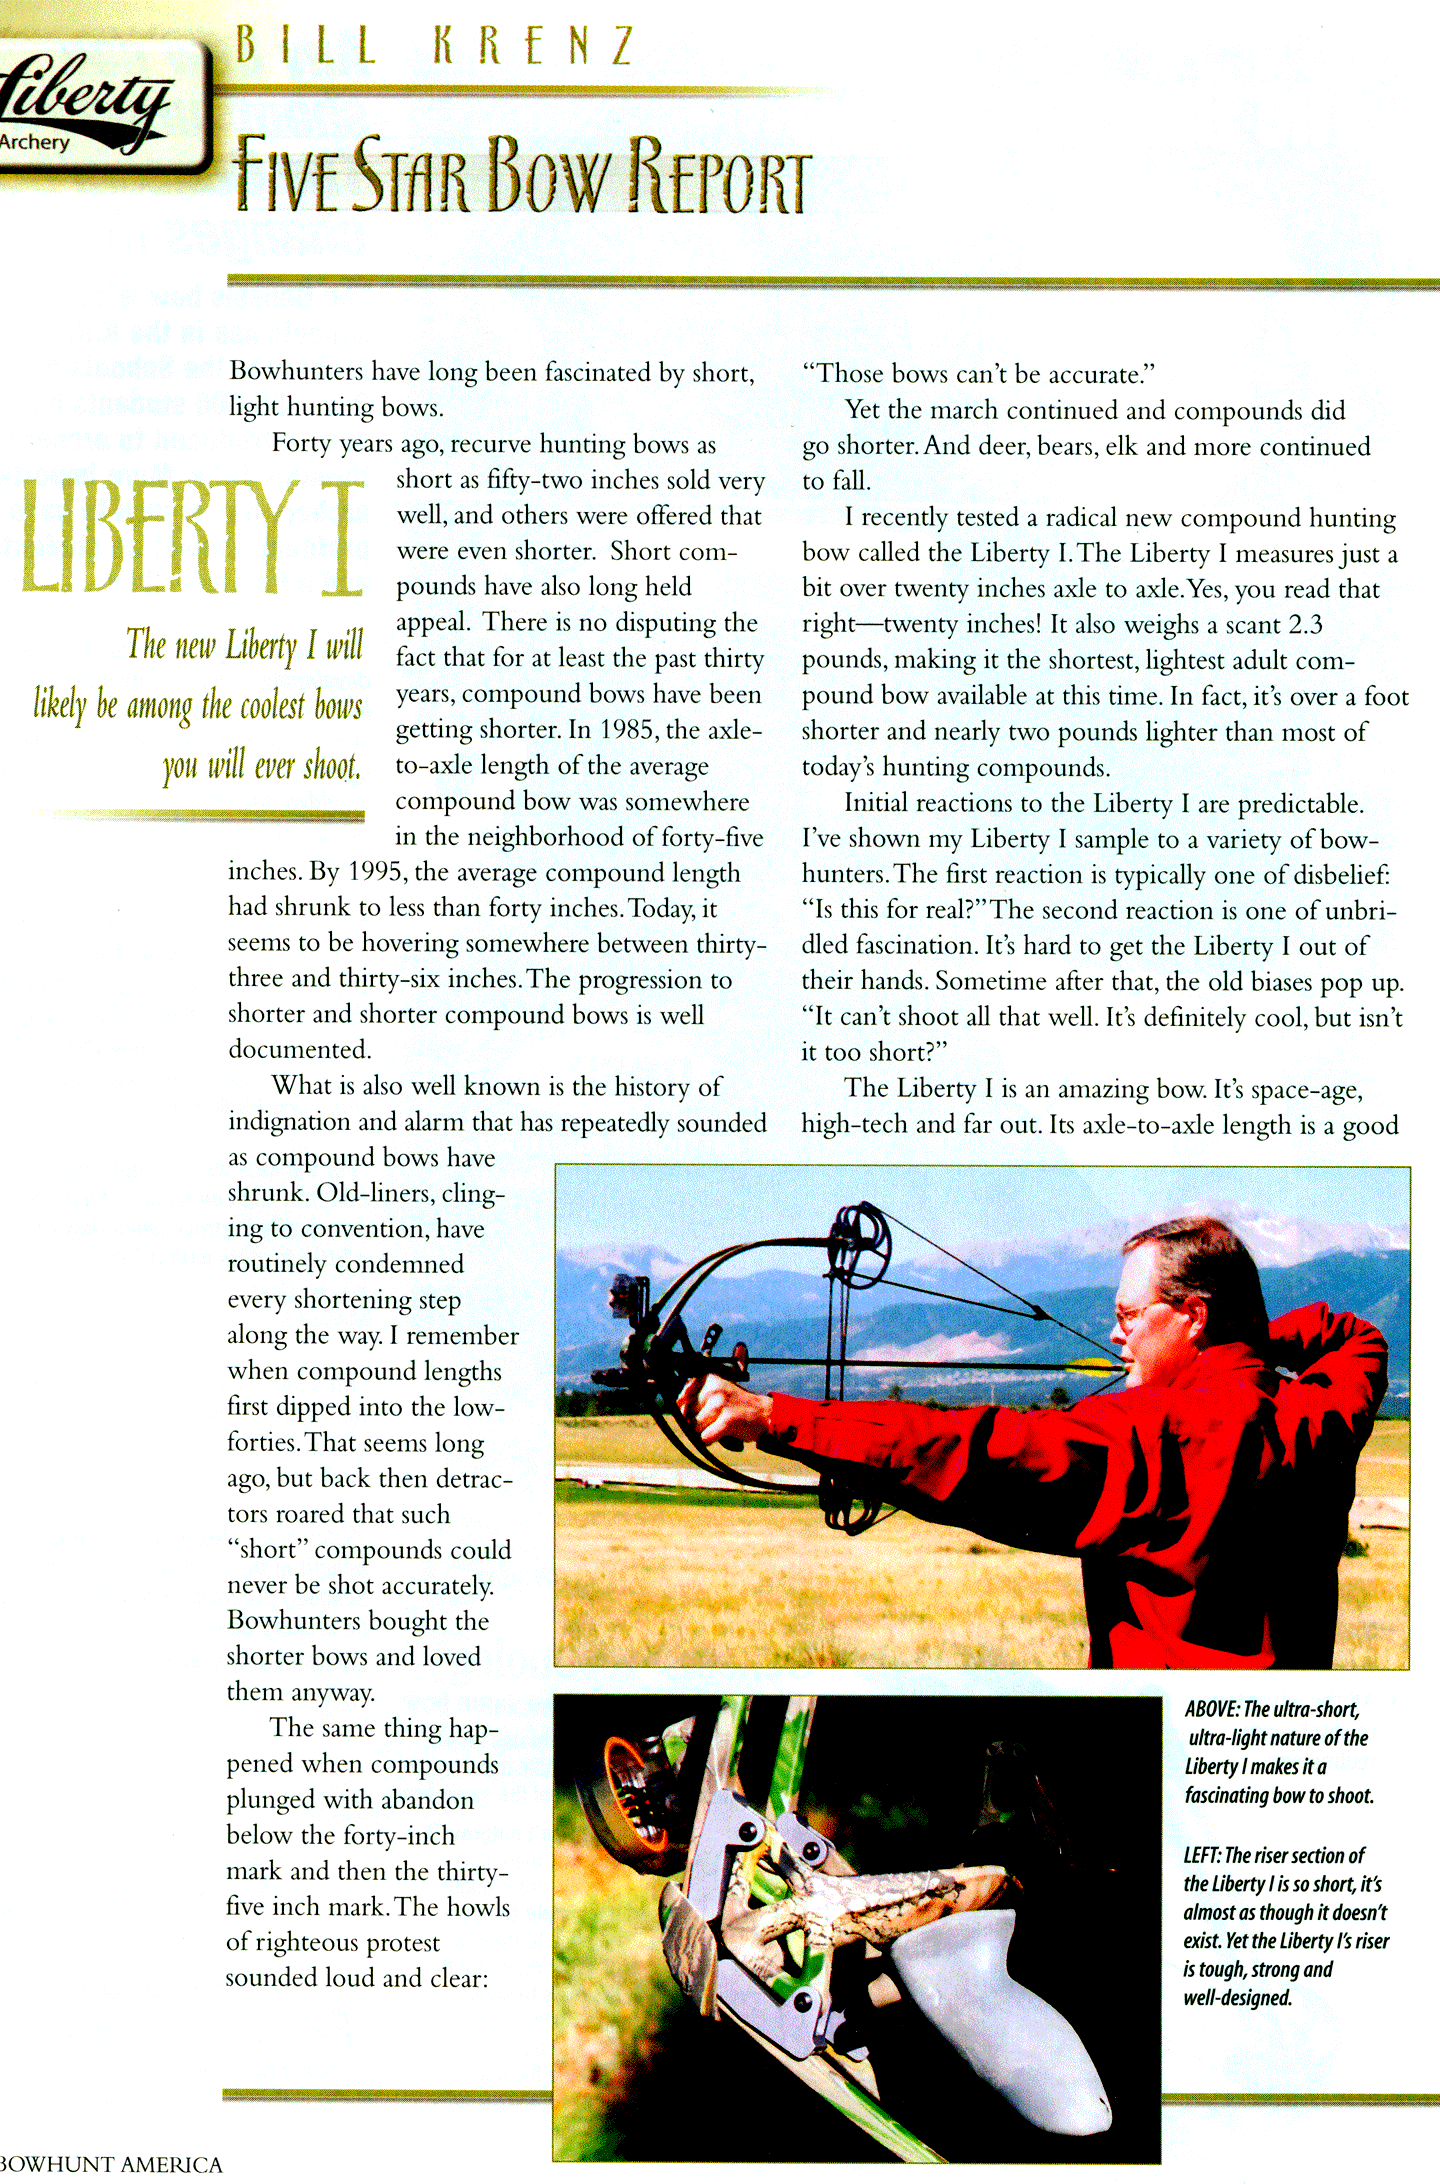 Bowhunt America 2008 Five Star bow review of Liberty Archery compound bow.